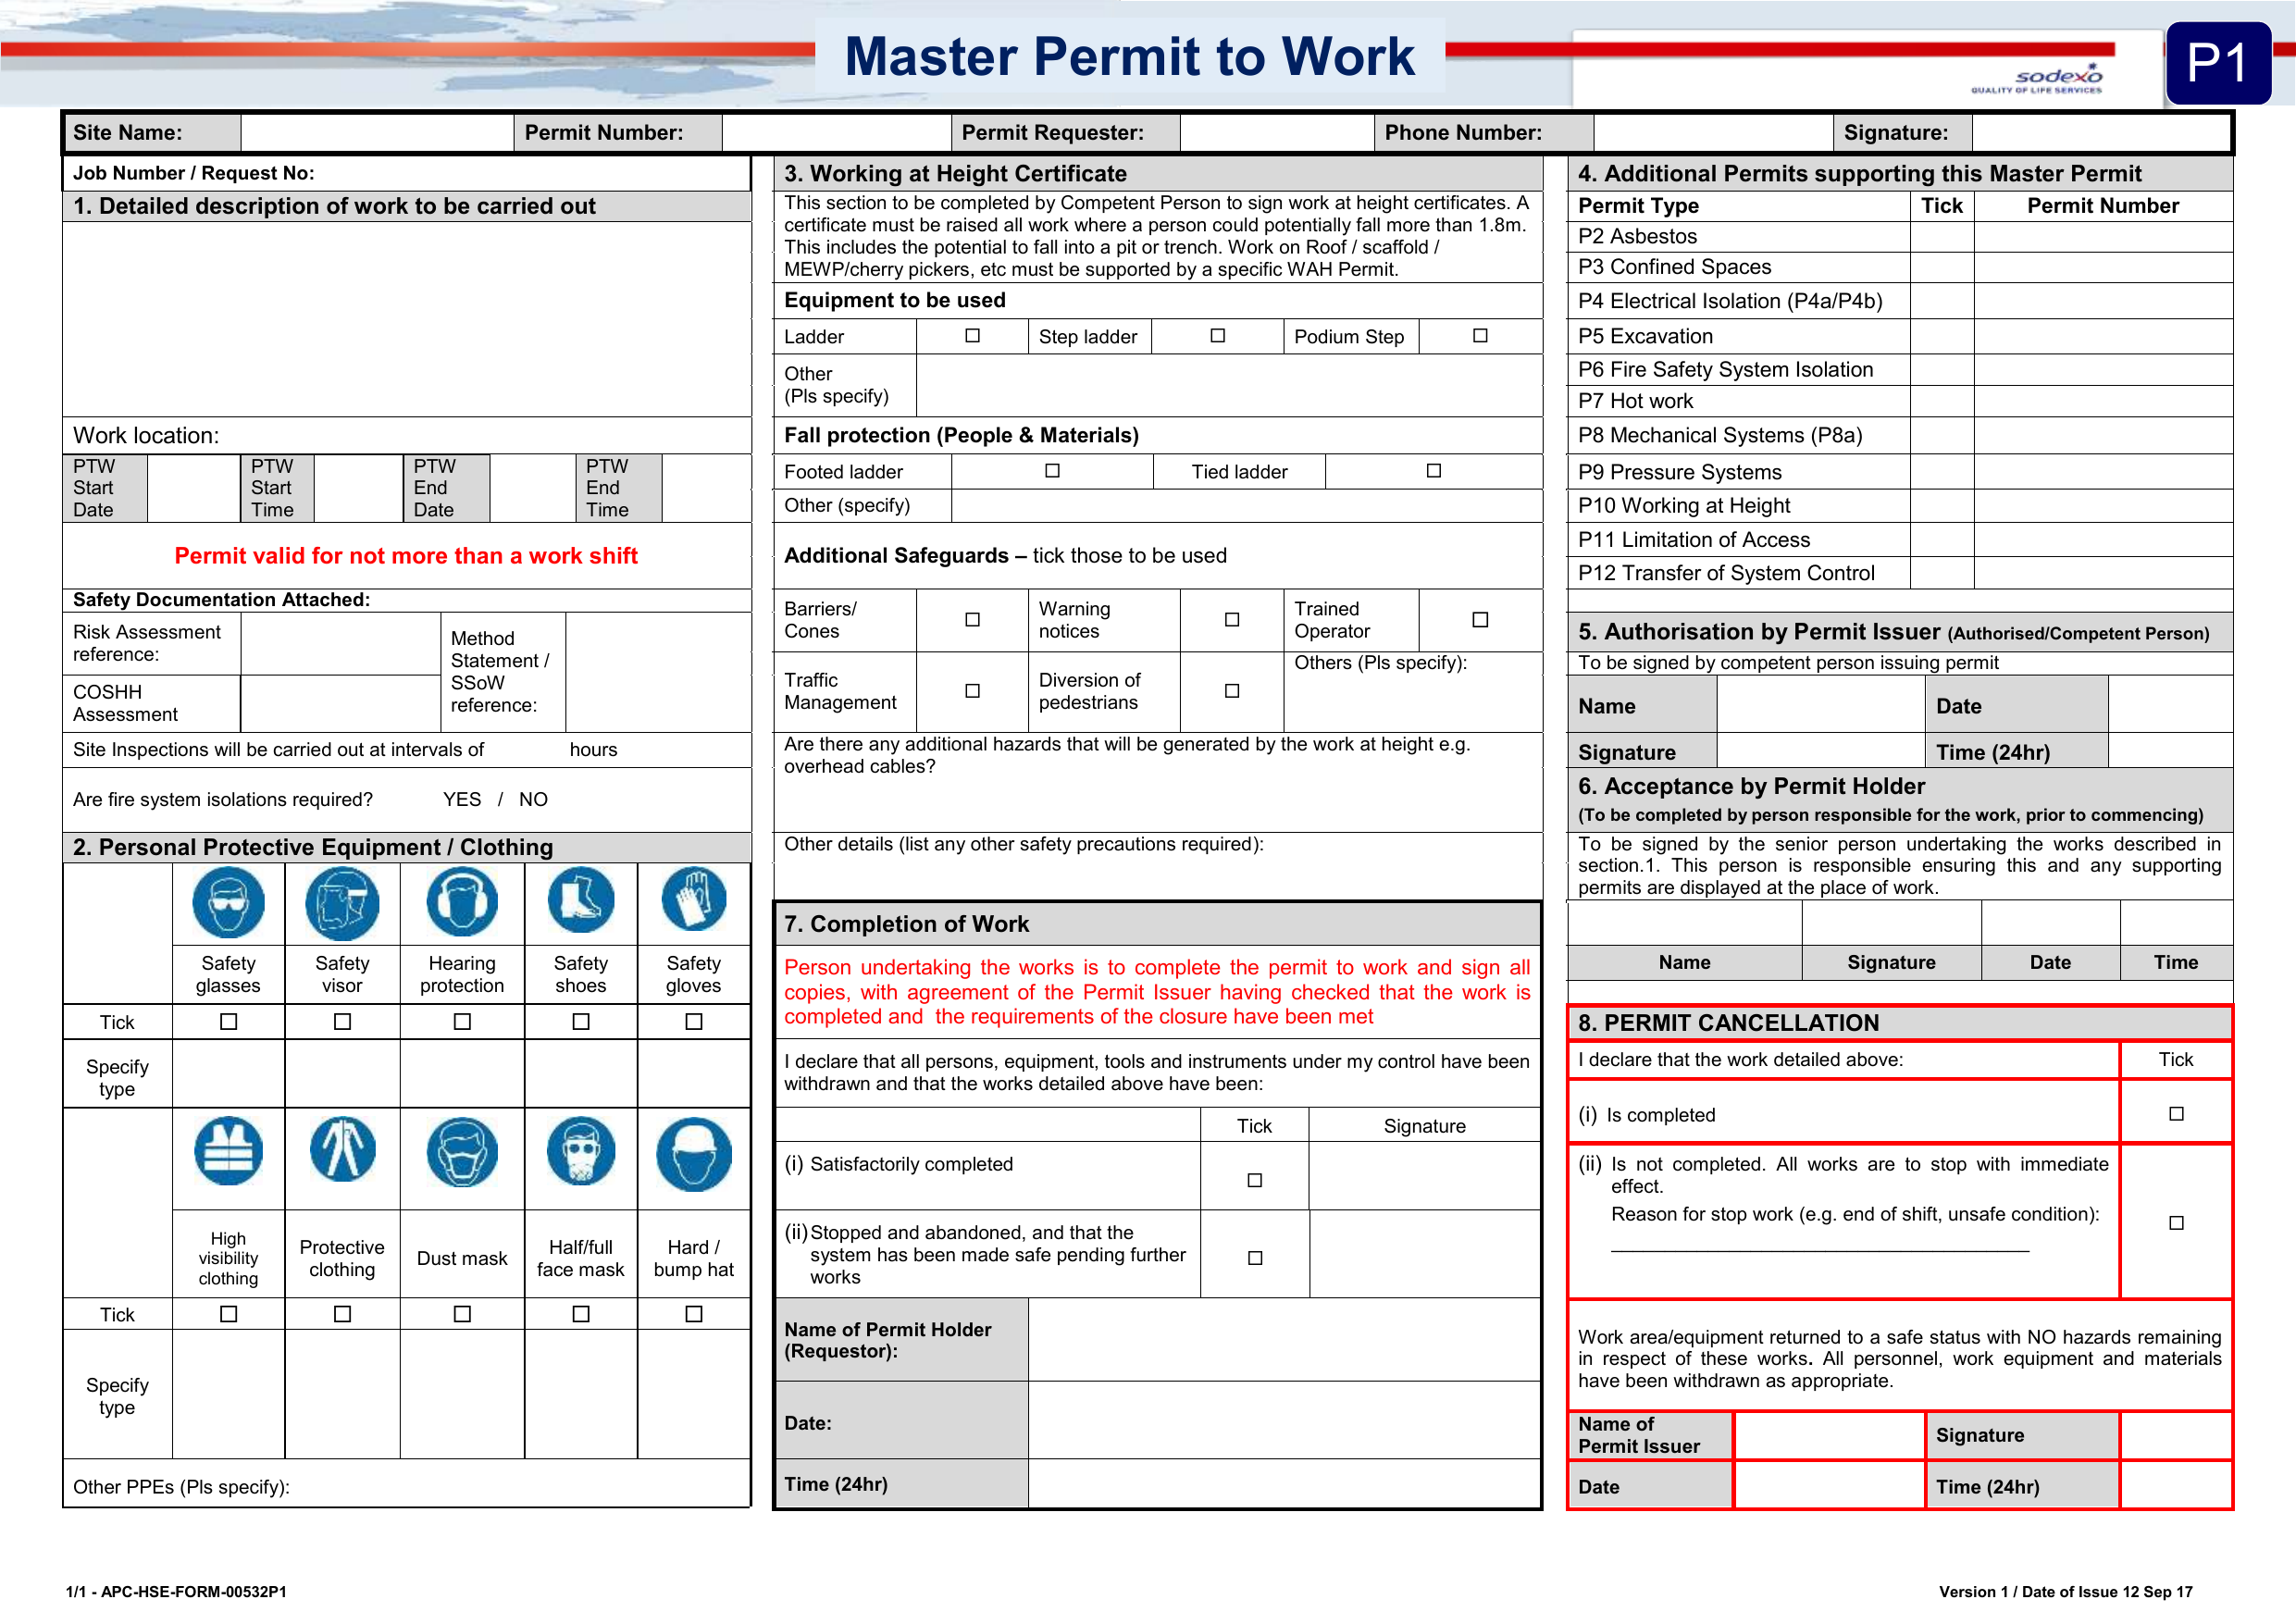 APC-HSE-FORM-23P23 - Master Permit to Work Inside Electrical Isolation Certificate Template